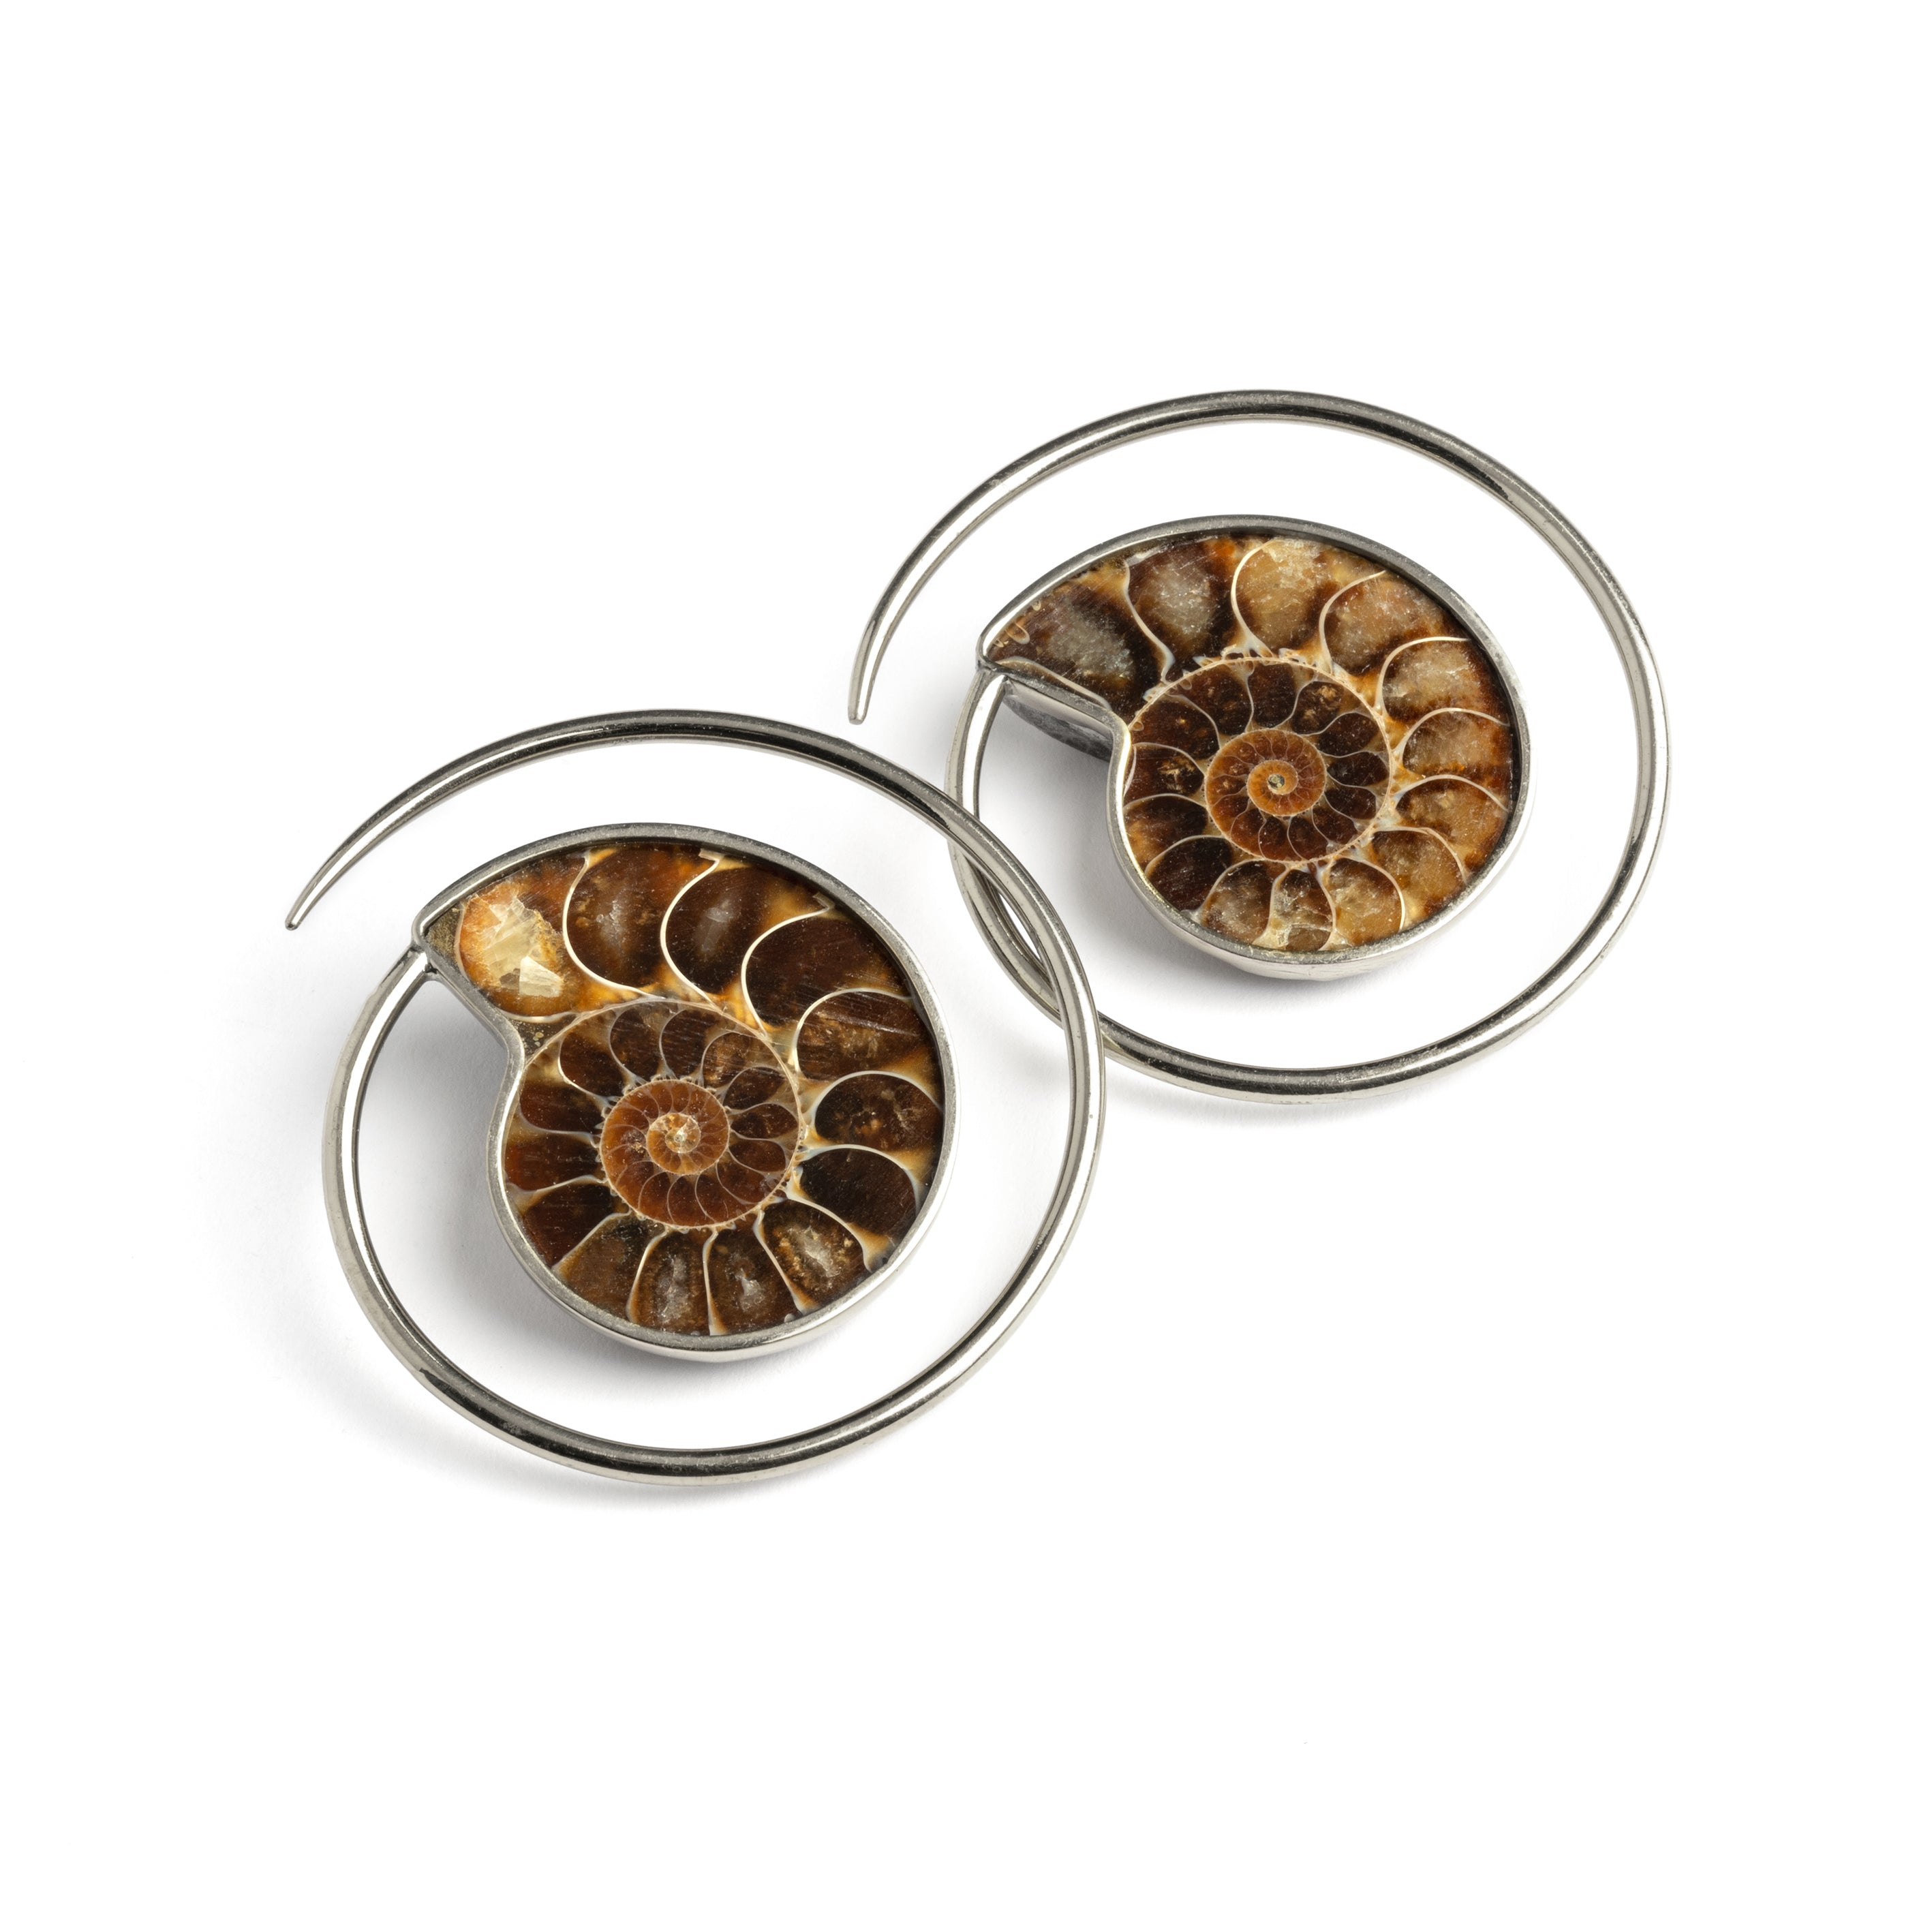 pair of silver spirals ear weights hangers with Ammonite fossil 